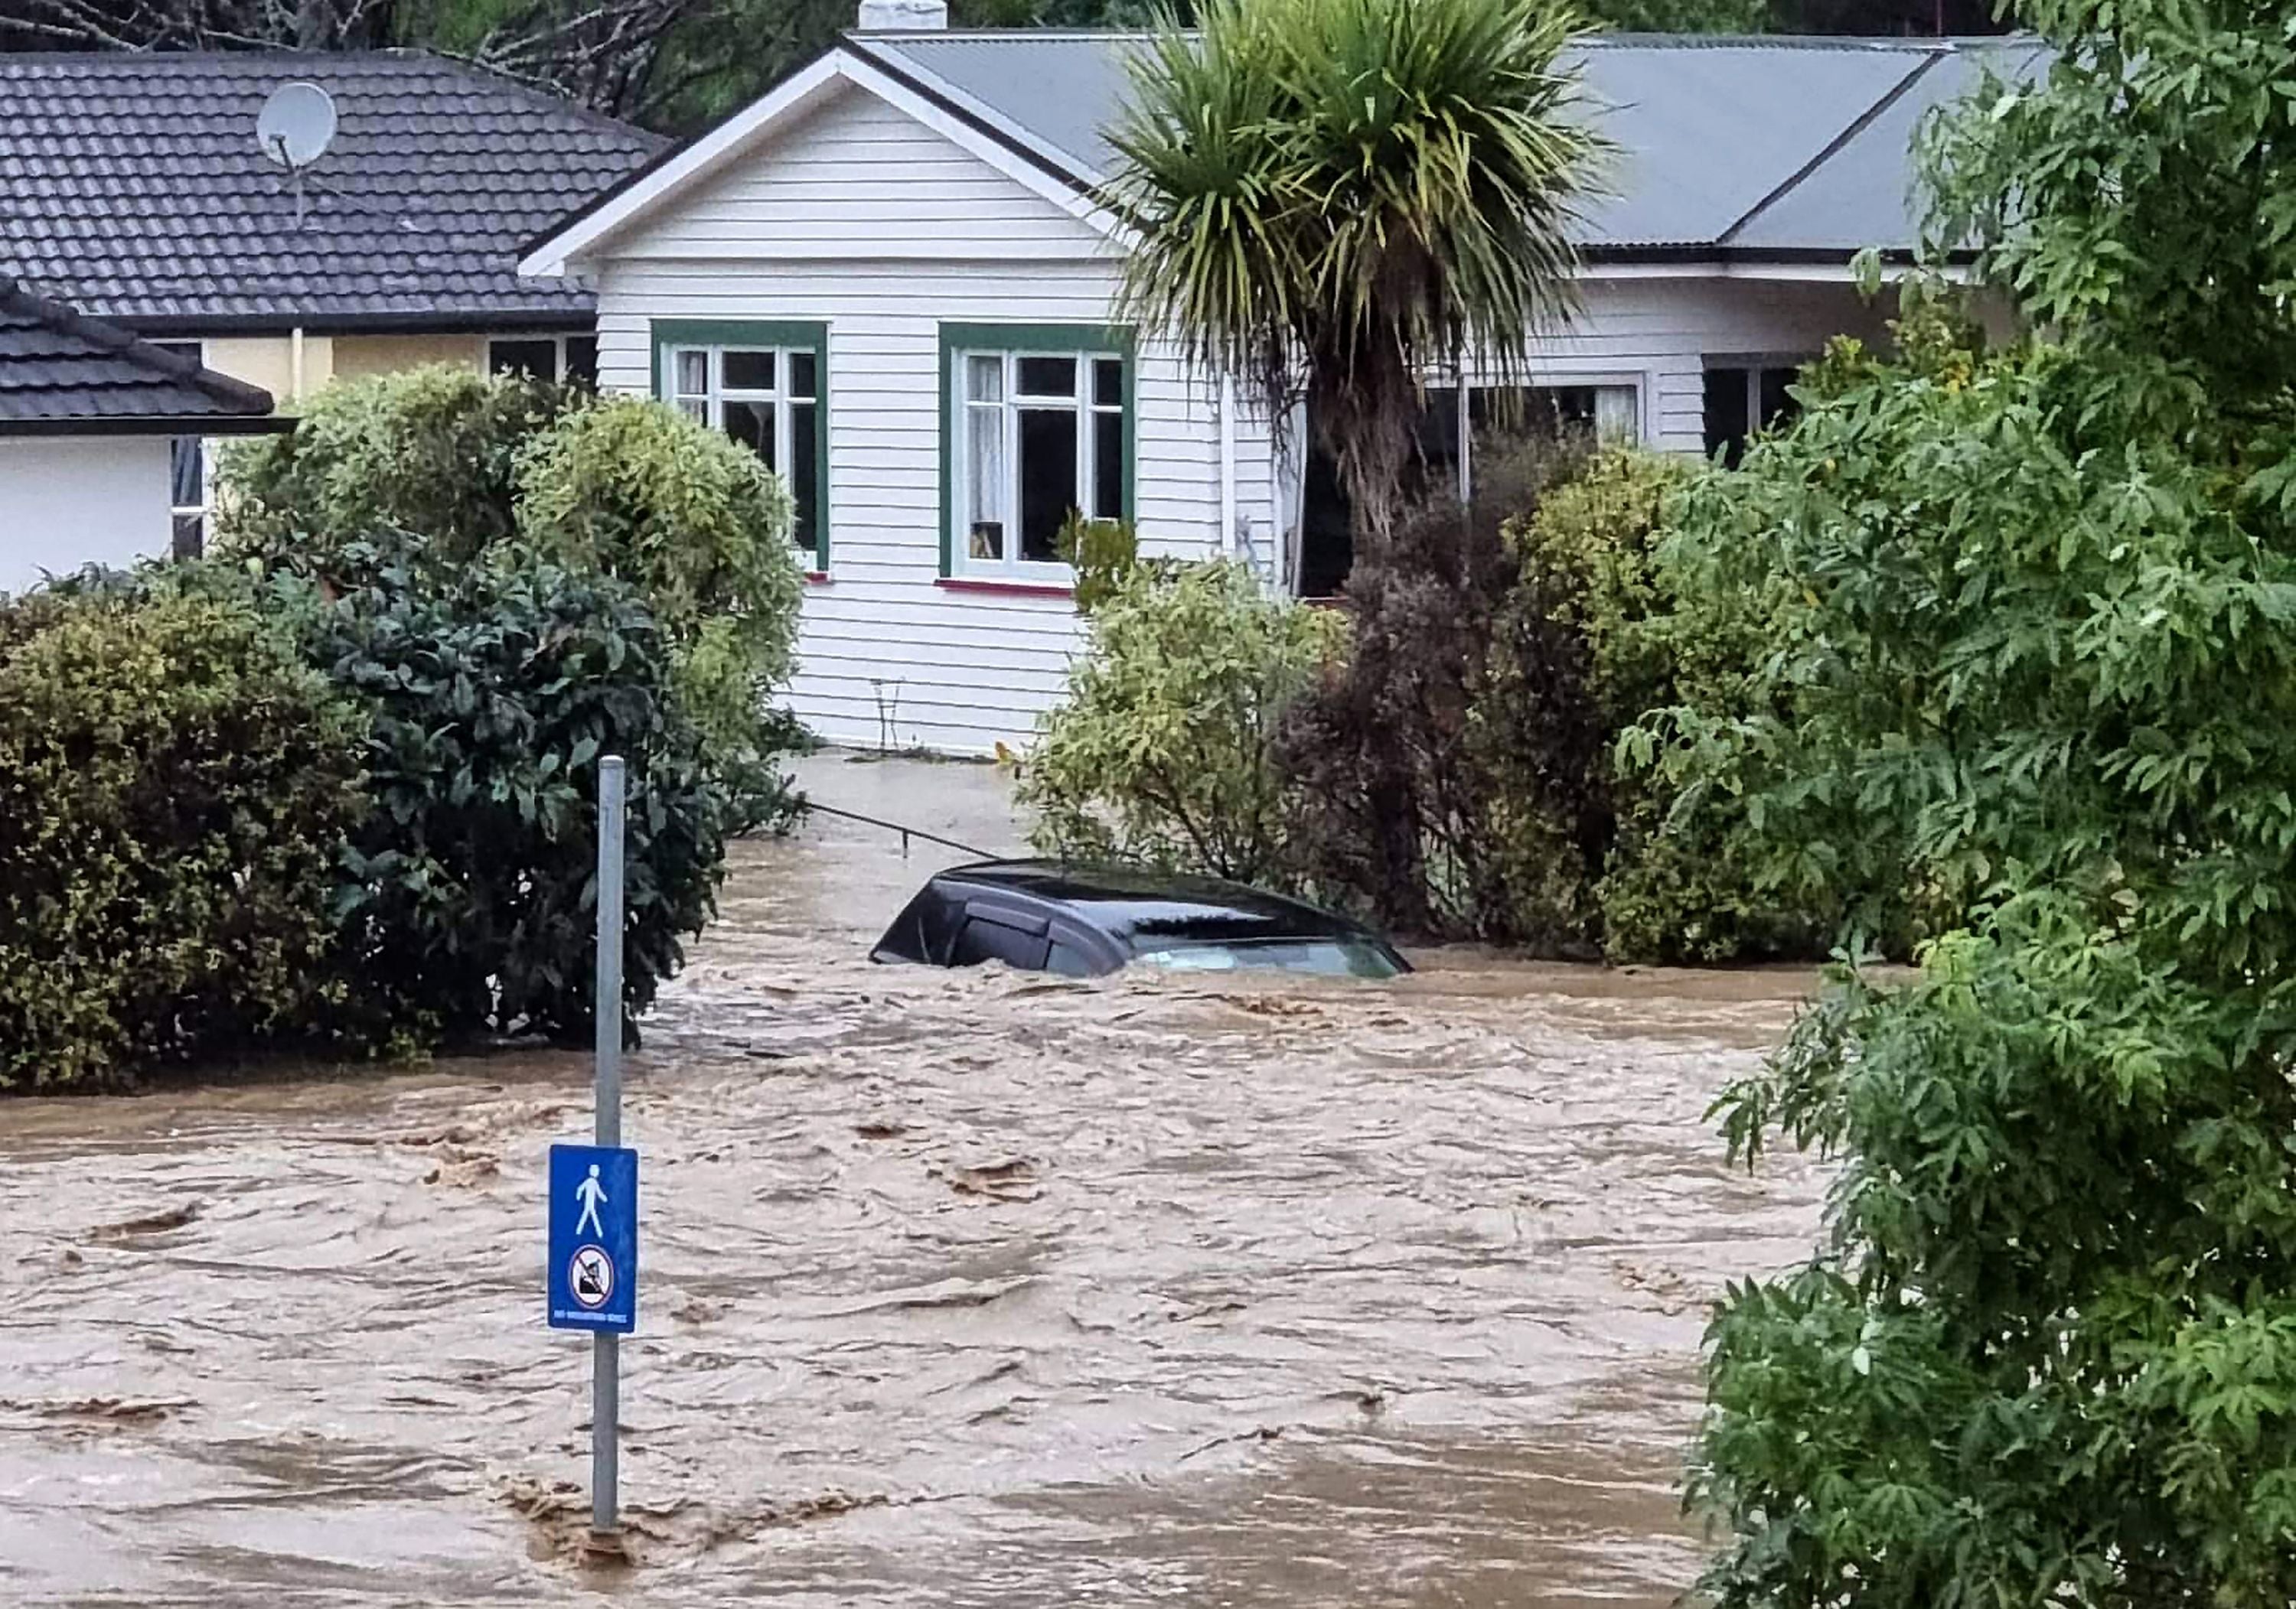 A car is inundated by floodwater in central Nelson, New Zealand